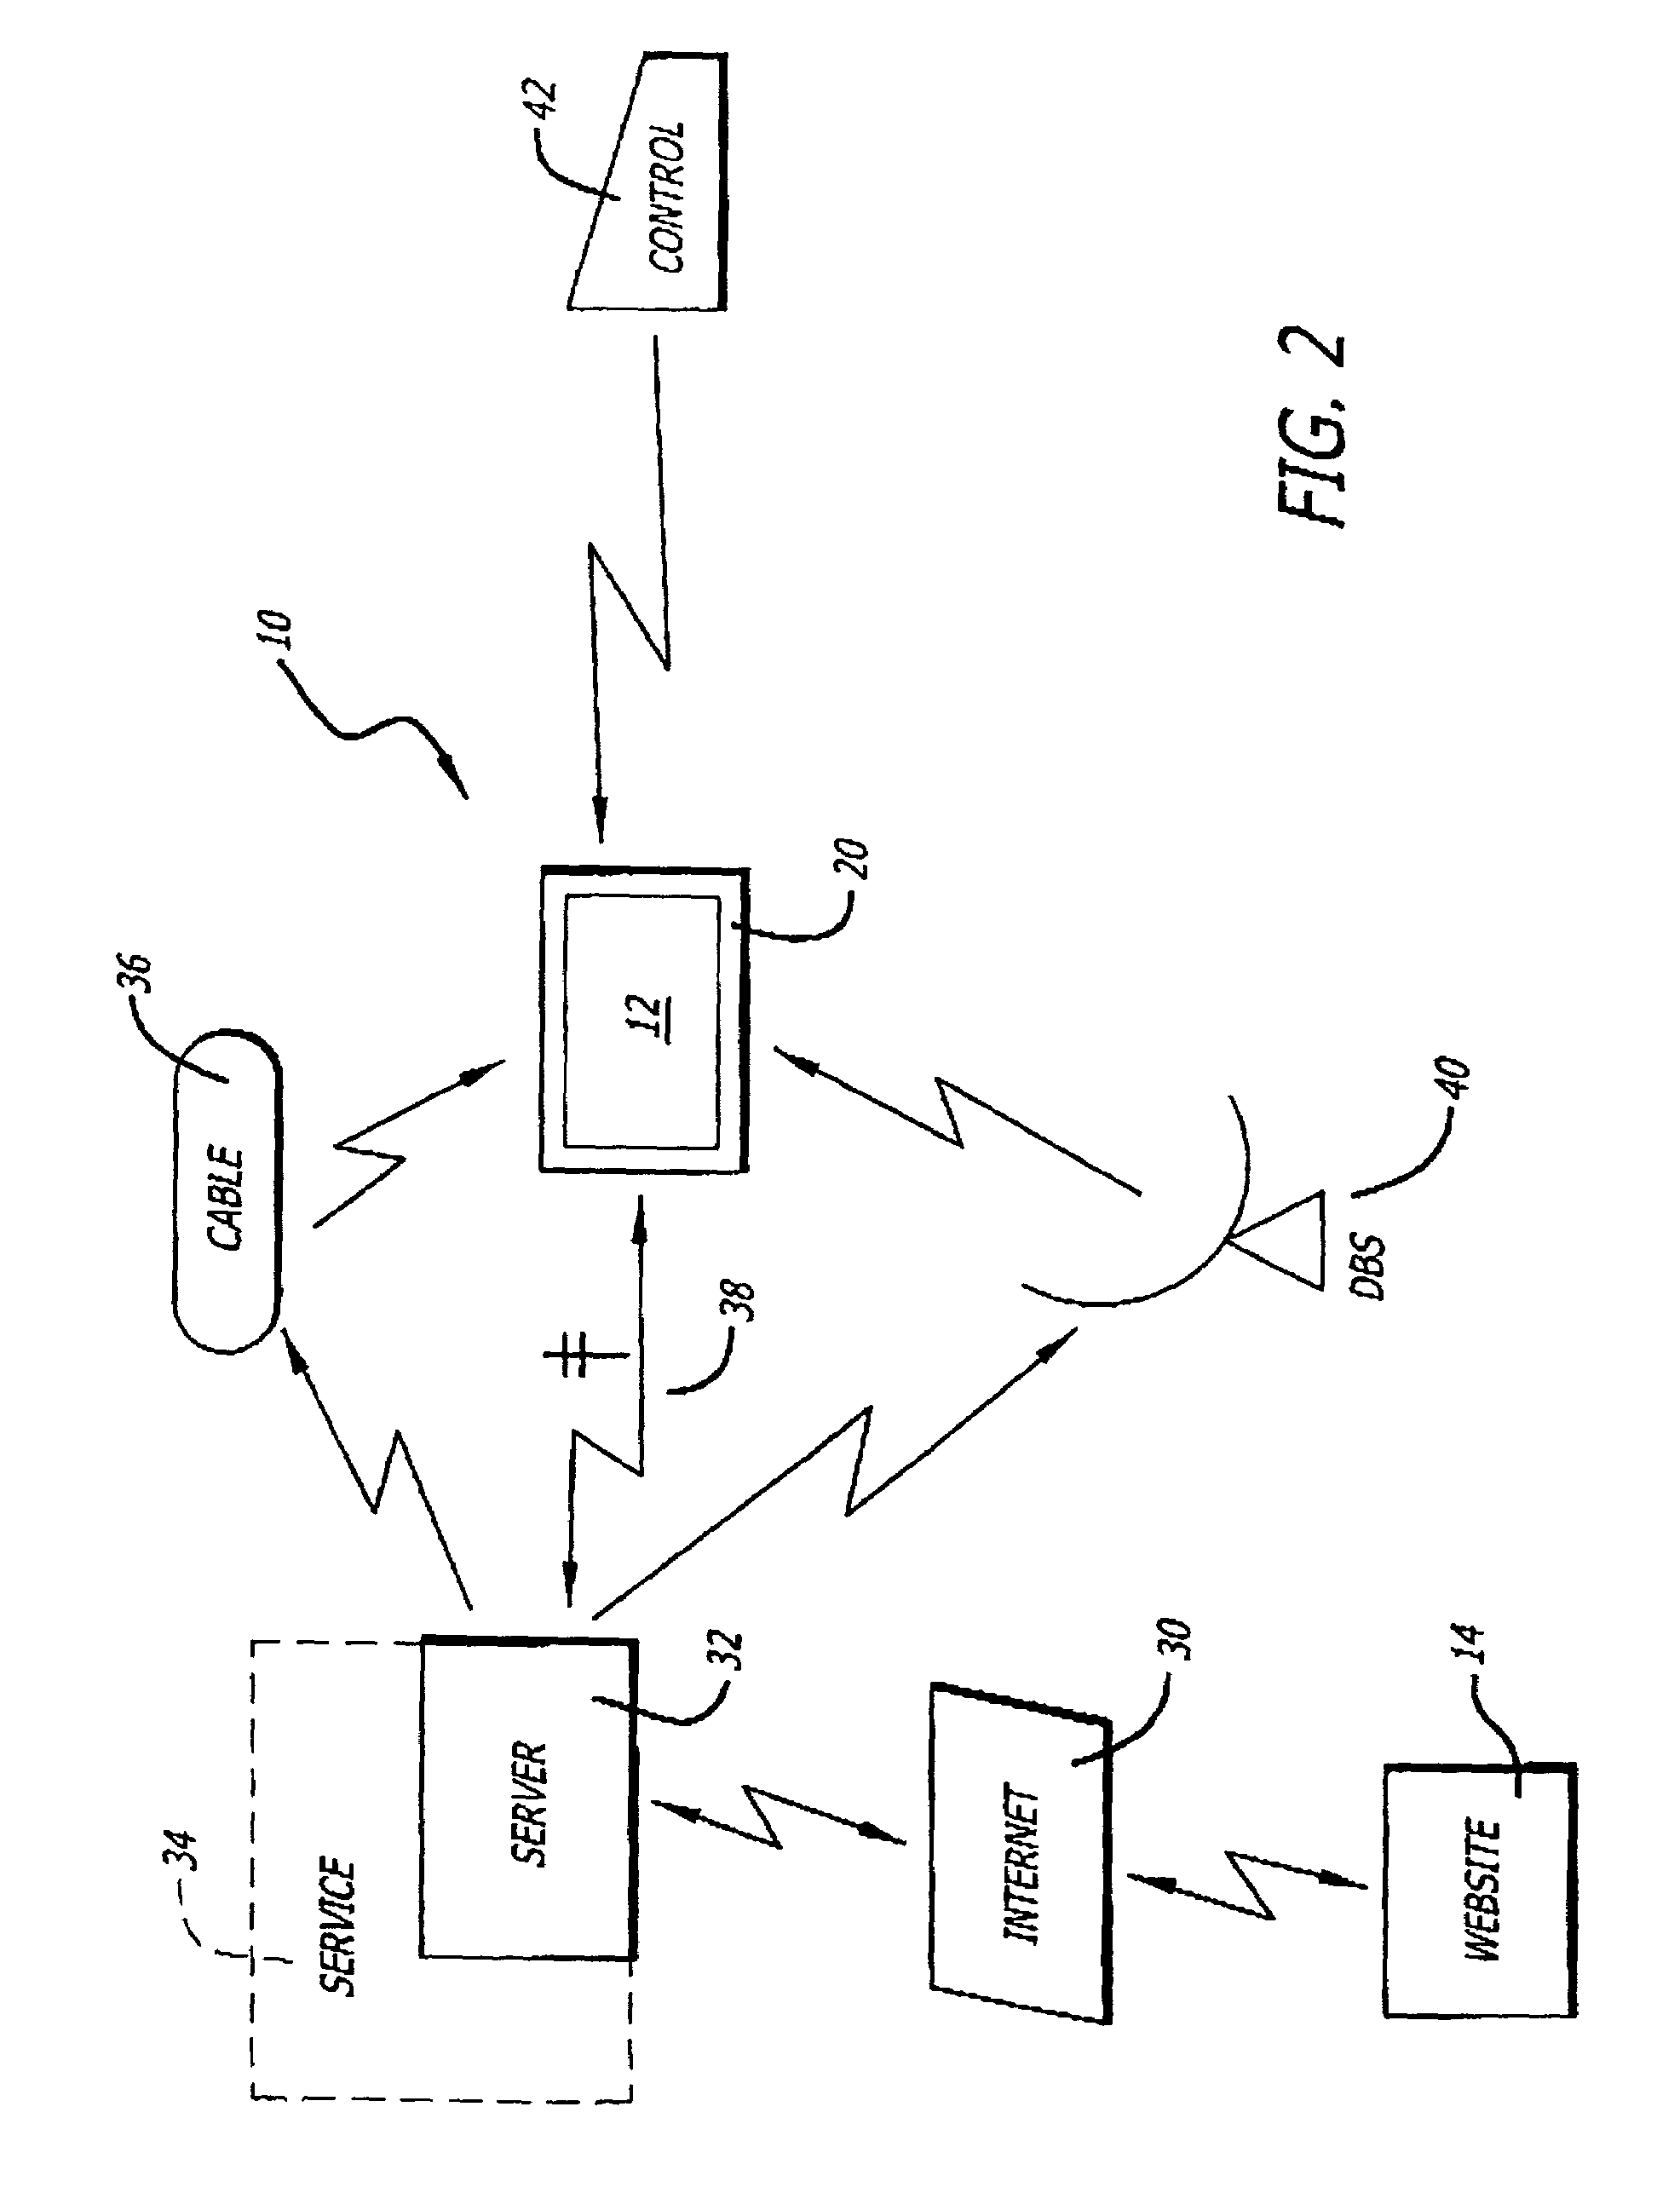 Web channel guide graphical interface system and method